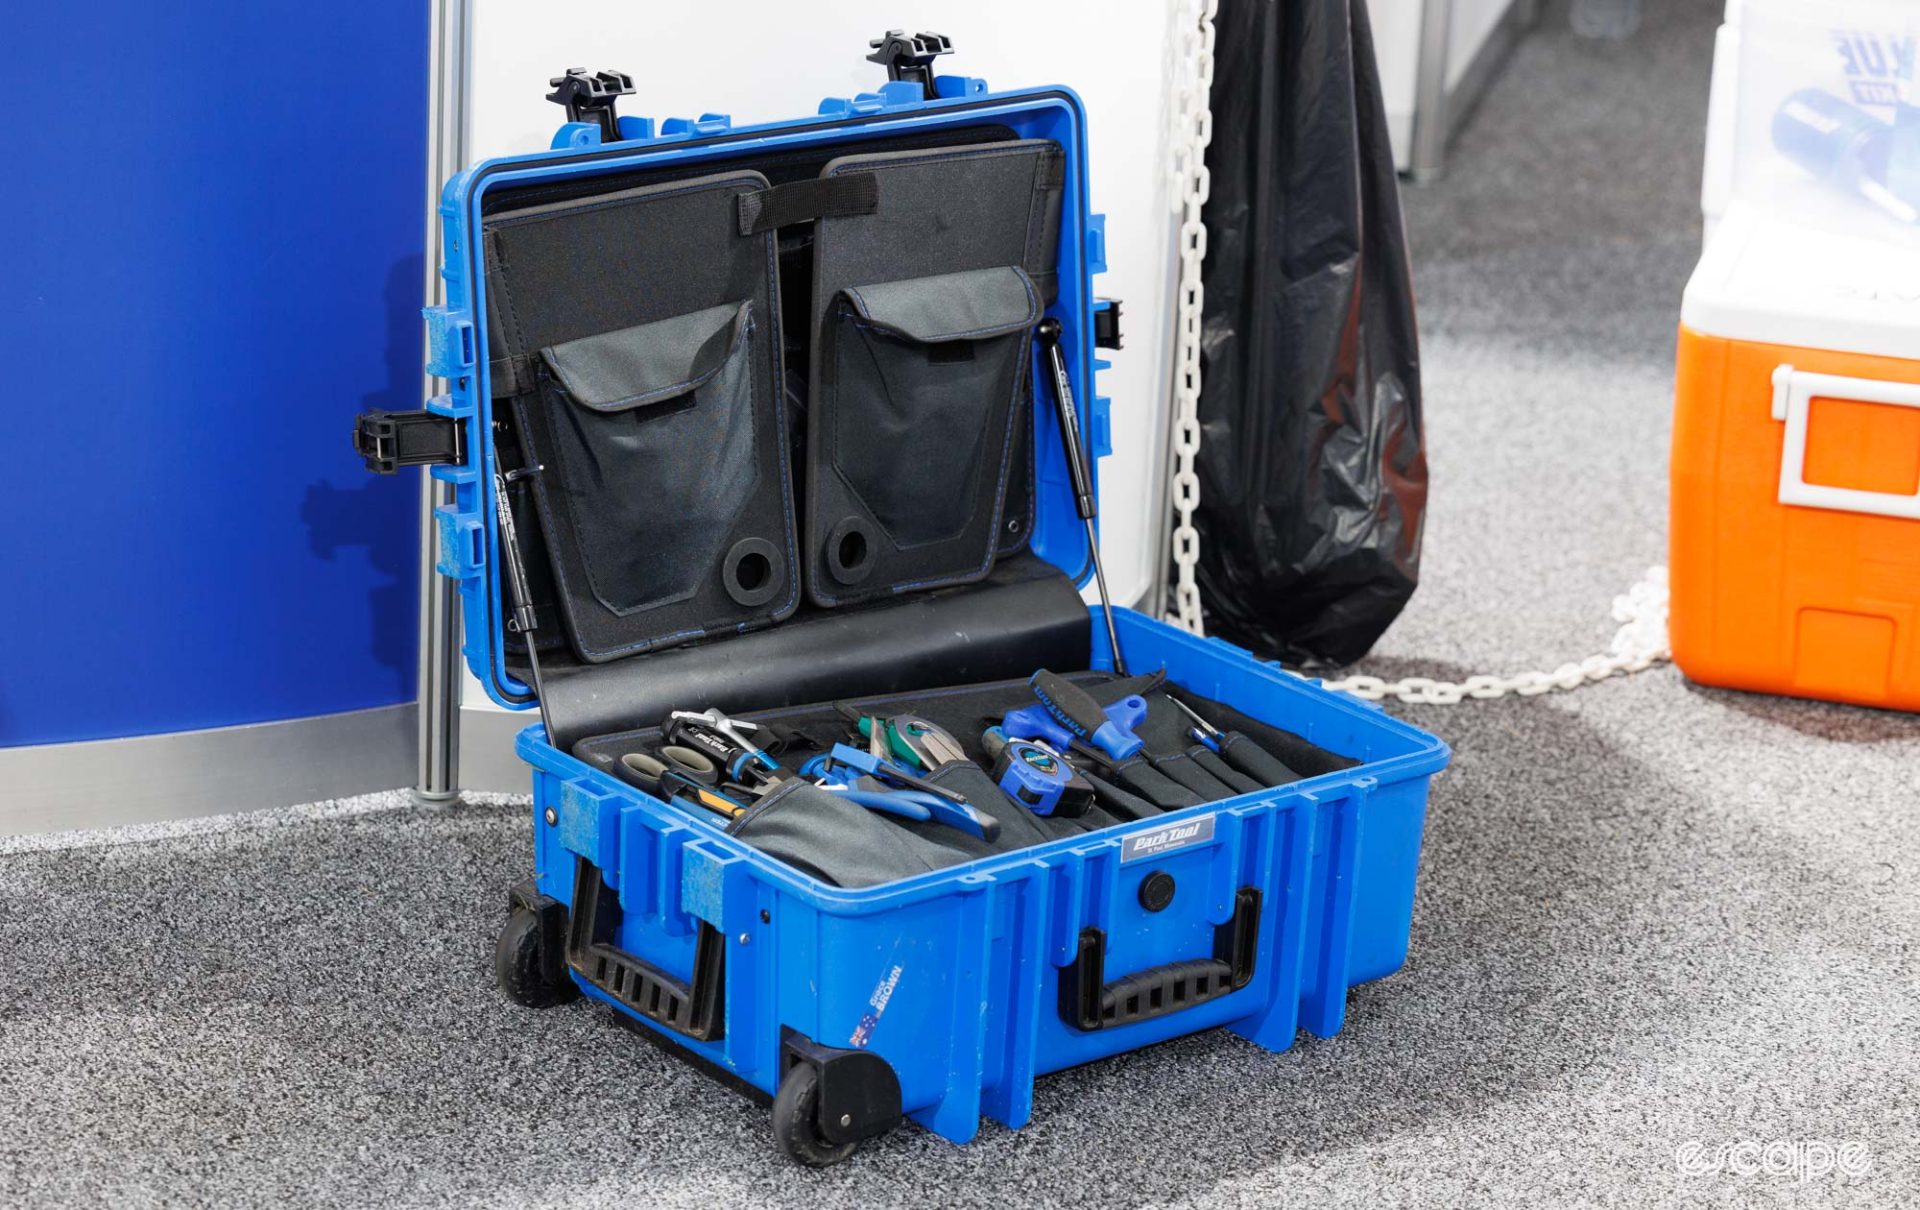 A large Park Tool case sits on the floor, filled with blue tools. 